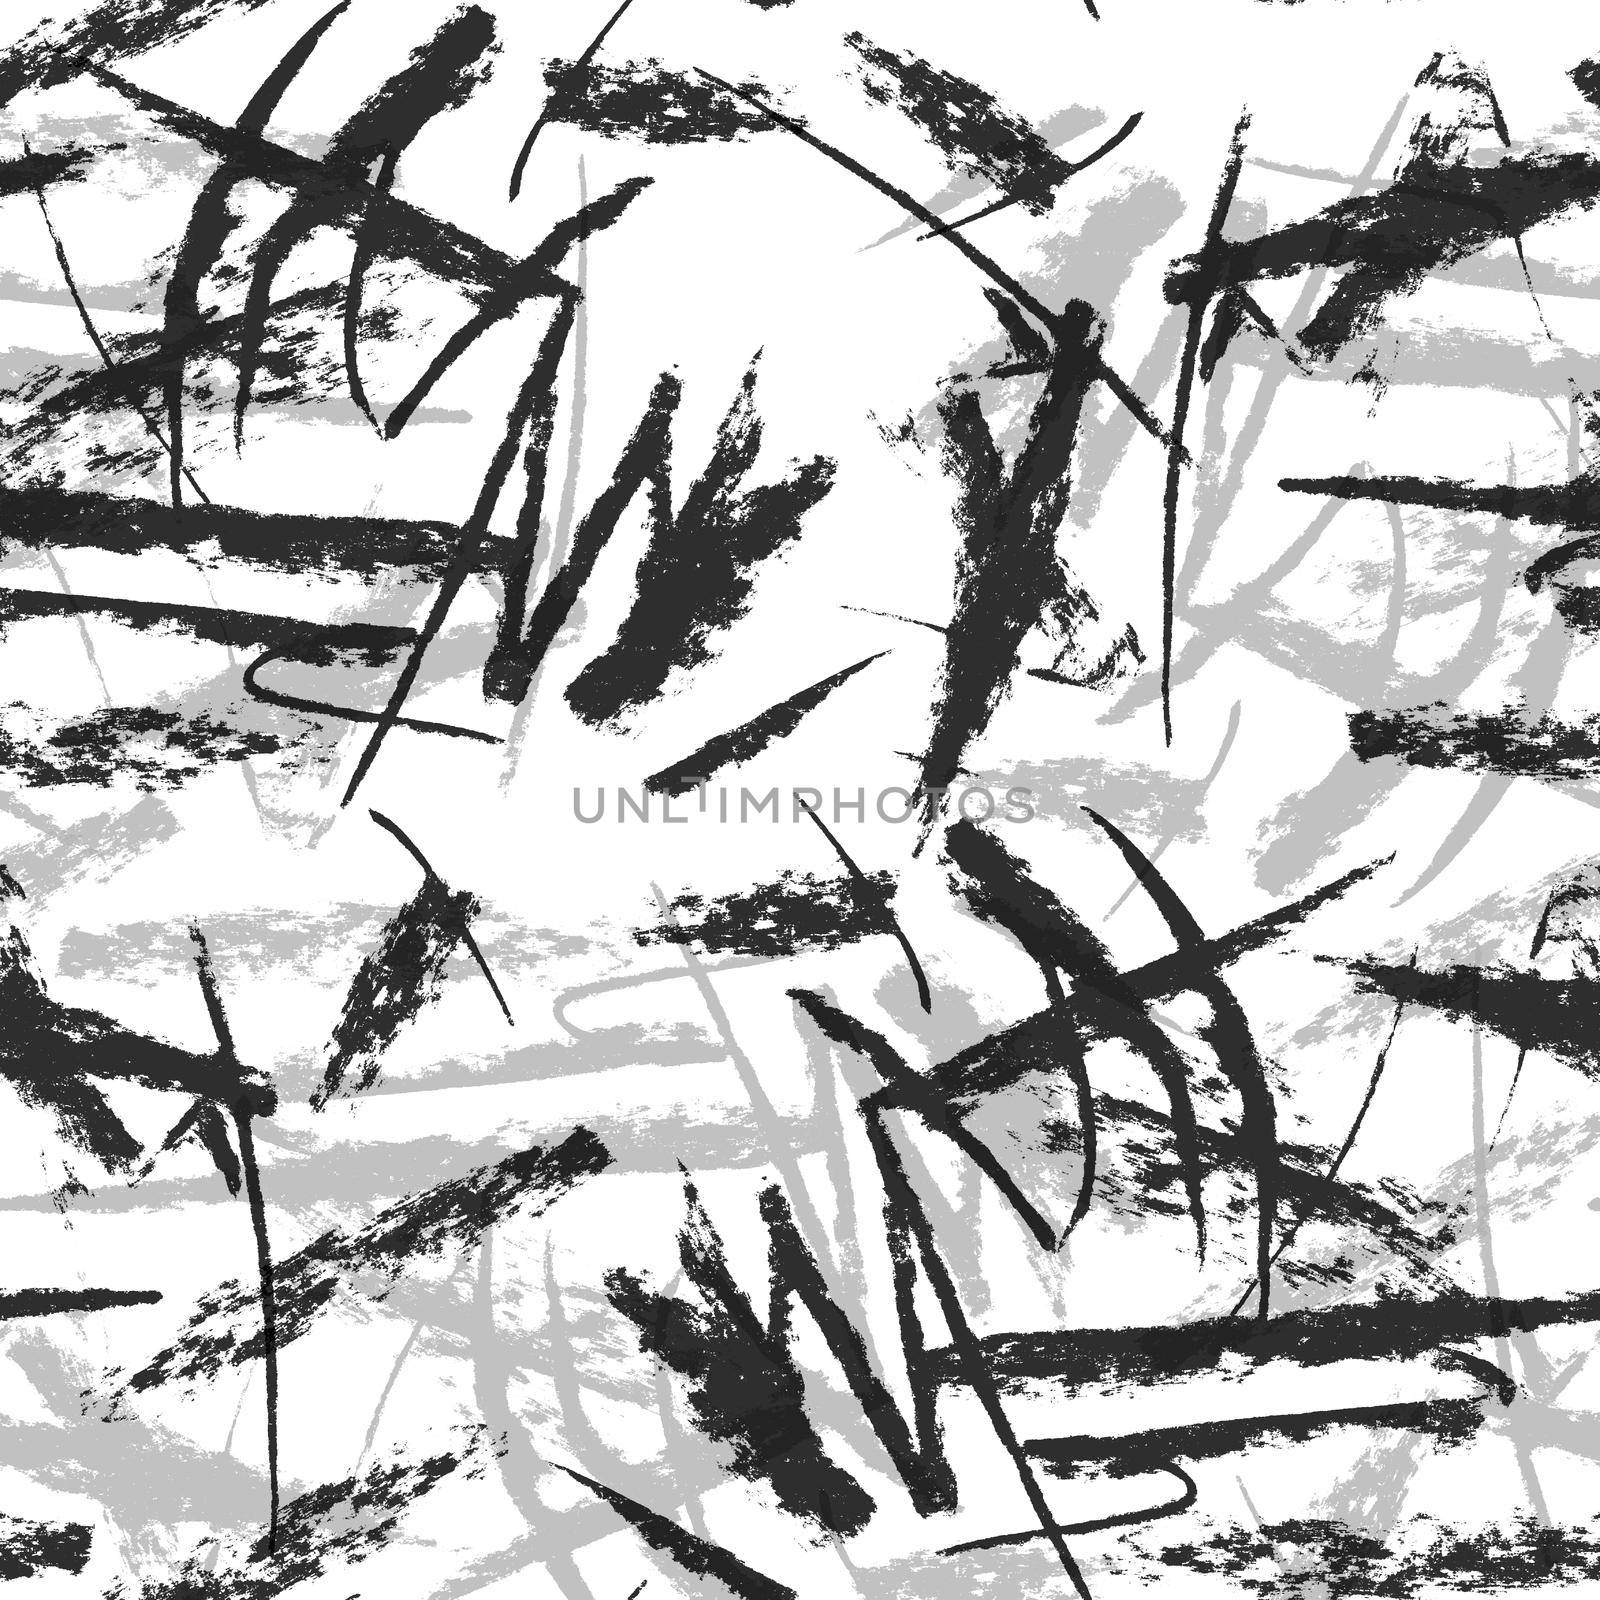 Pencil art seamless pattern, abstract repeat hand drawn sketch texture, natural dark grunge background illustration